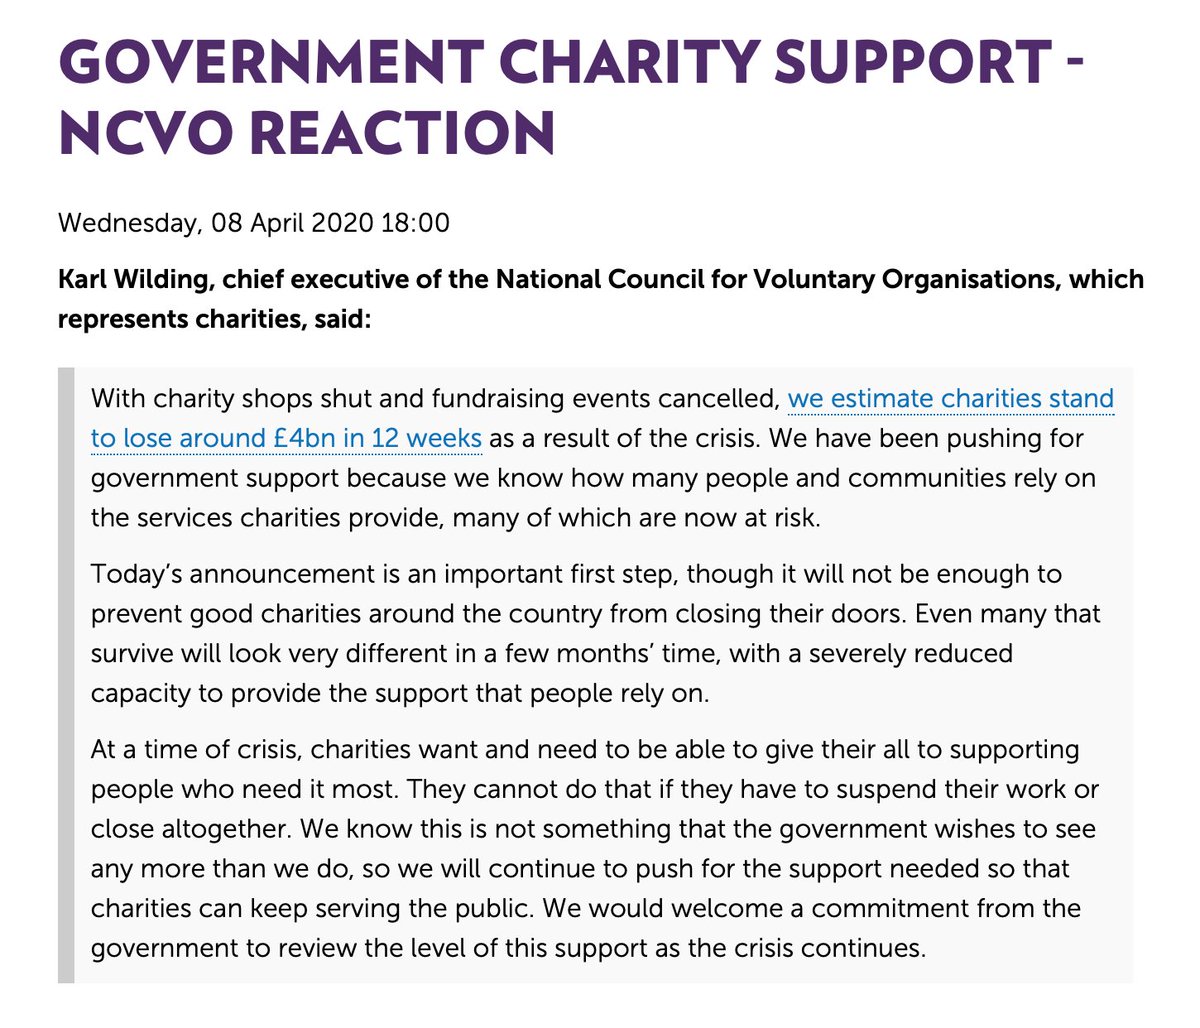 In response to the Chancellor's announcement on support for charities and civil society, here's a statement from me on behalf of  @ncvo:  https://www.ncvo.org.uk/about-us/media-centre/press-releases/2752-government-charity-support-ncvo-reactionI would like to thank  @RishiSunak  @OliverDowden  @dianabarran and their teams for working hard on this package. 1/